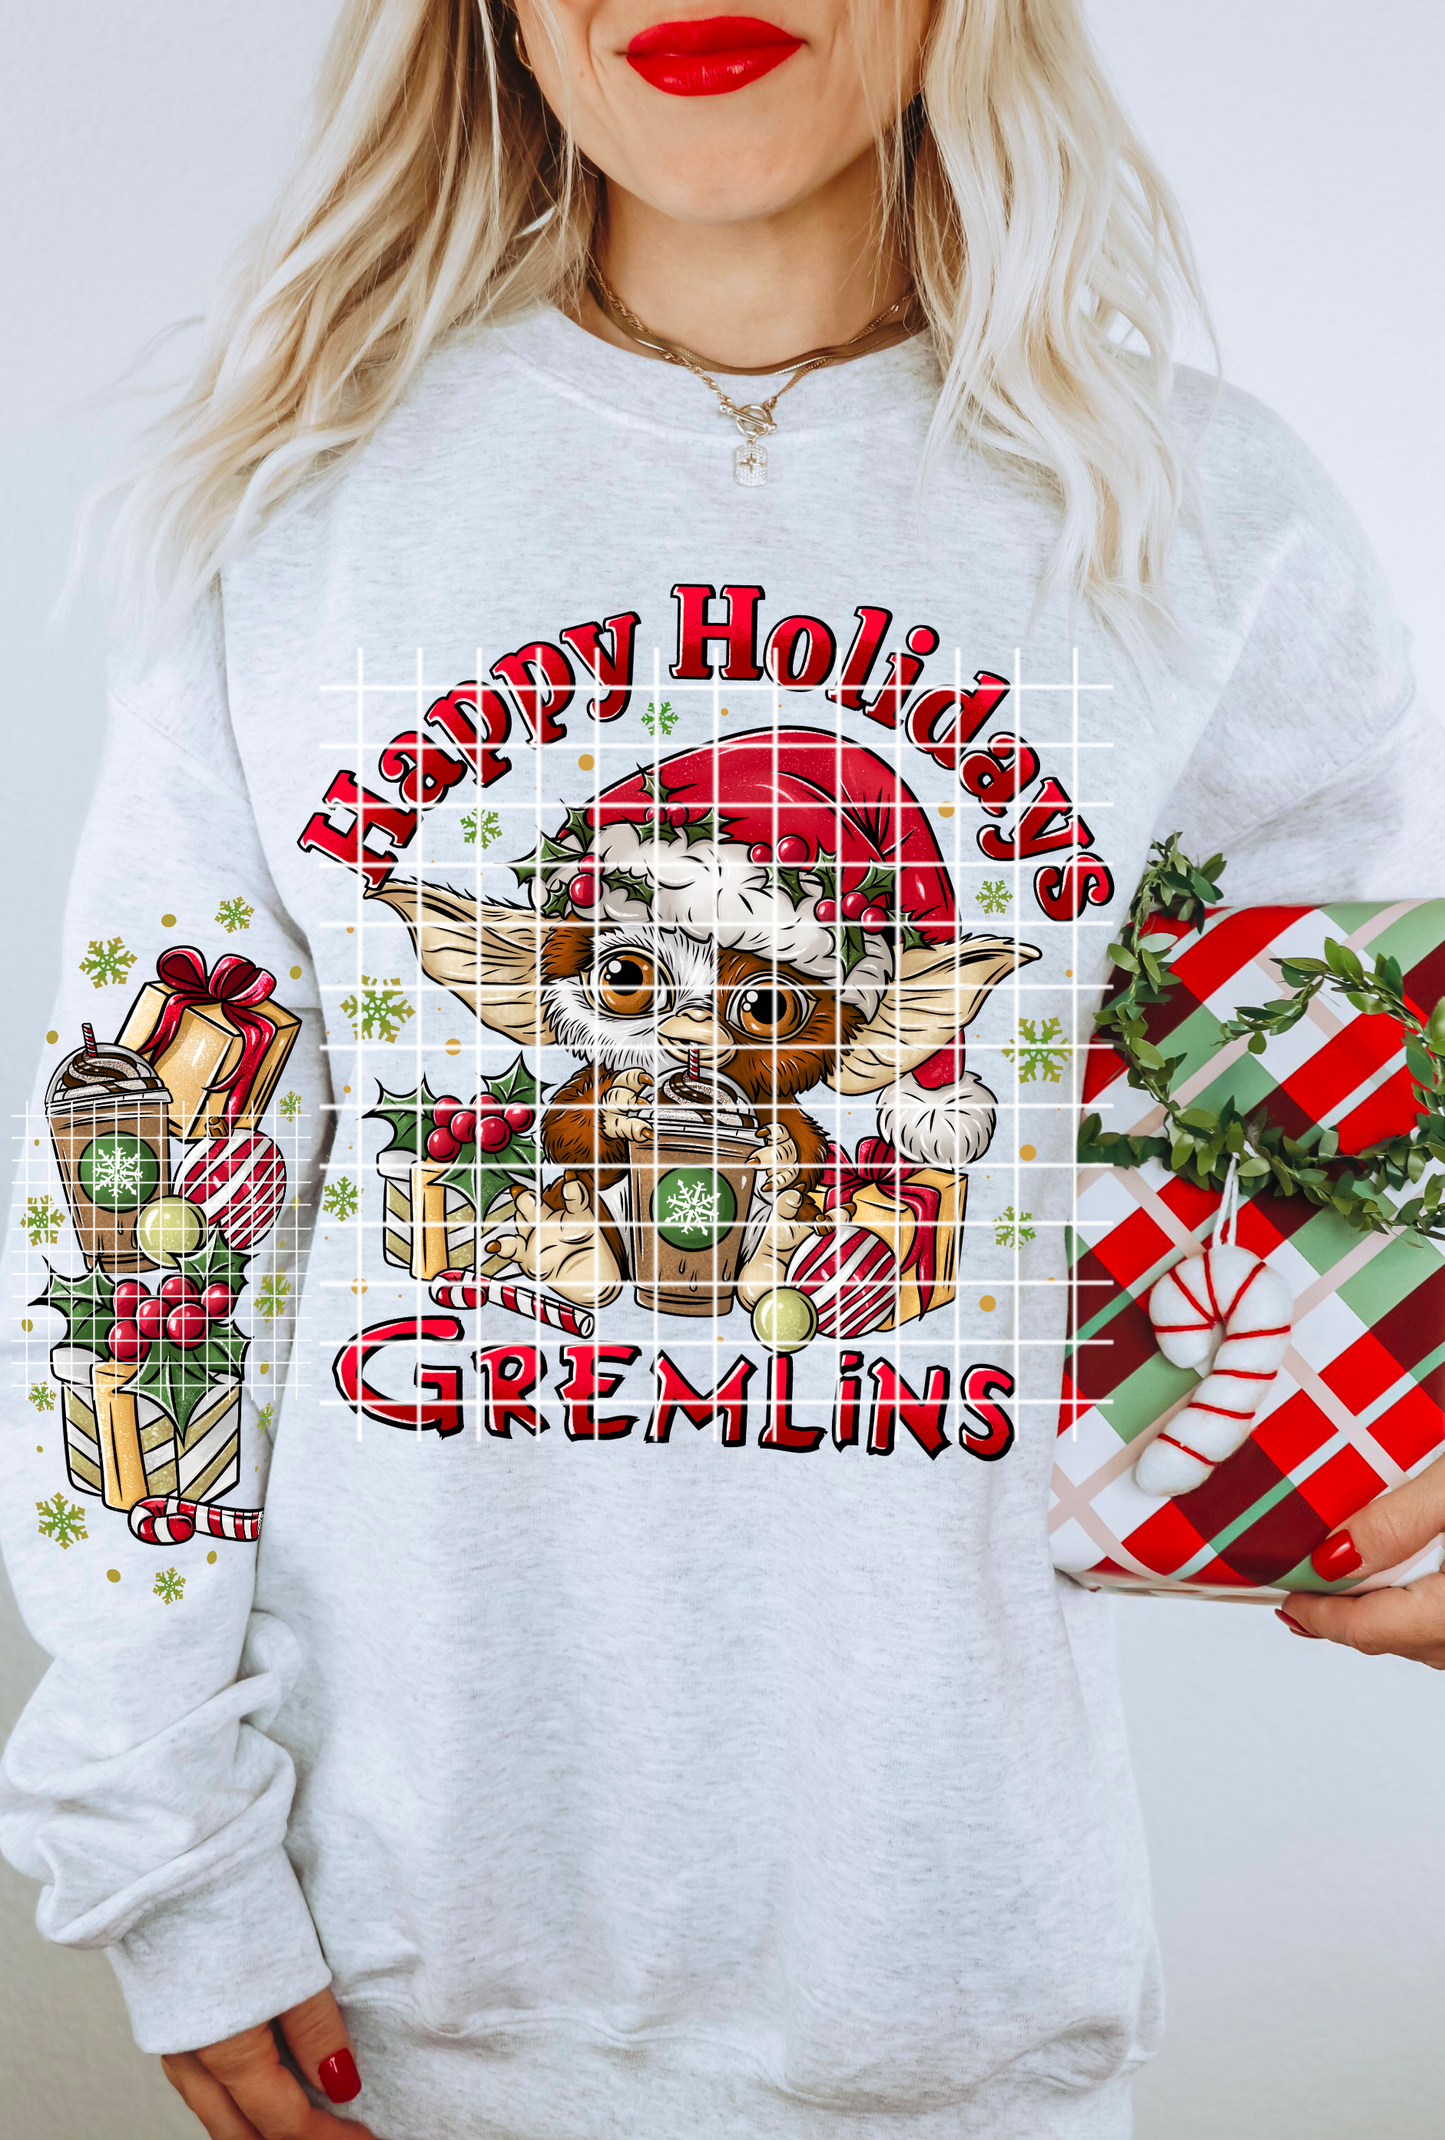 Happy Holidays Sweat Shirt | Trendy Christmas Hoodie with Sleeves | Fast Shipping | Super Soft Shirts for Women